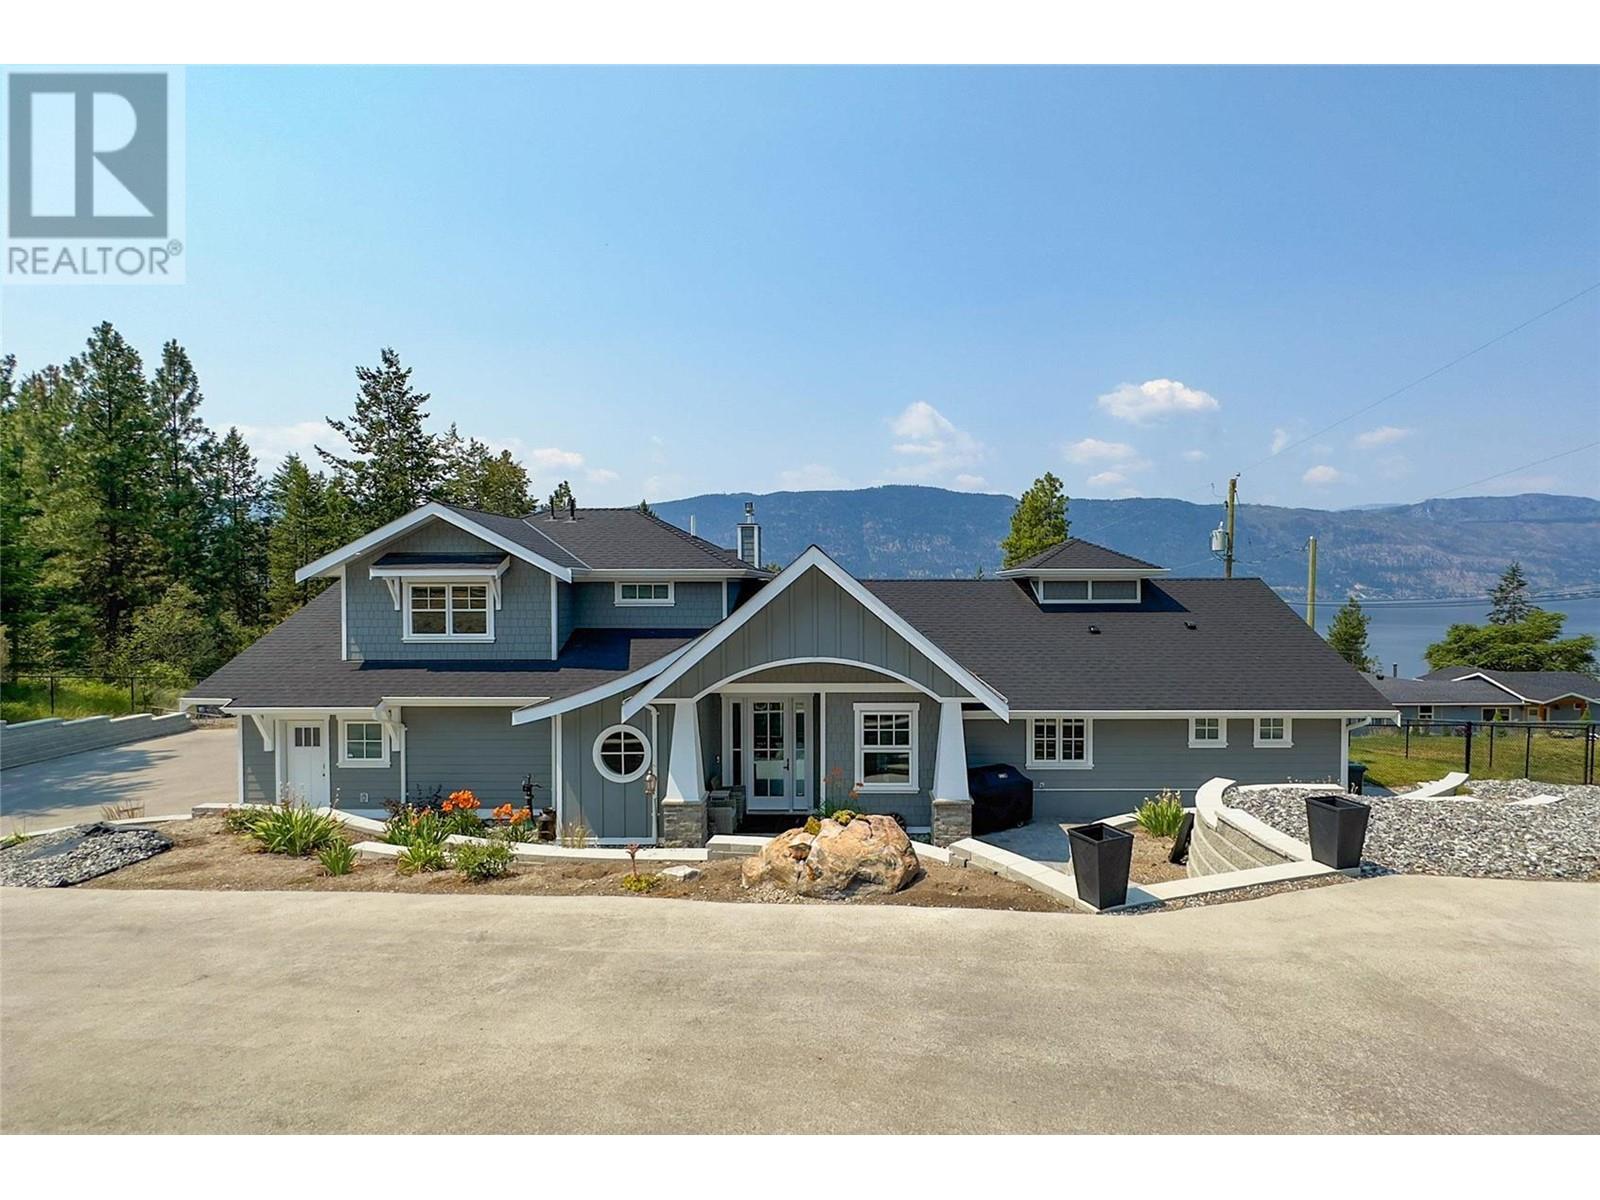  5424 Stubbs Road, Lake Country